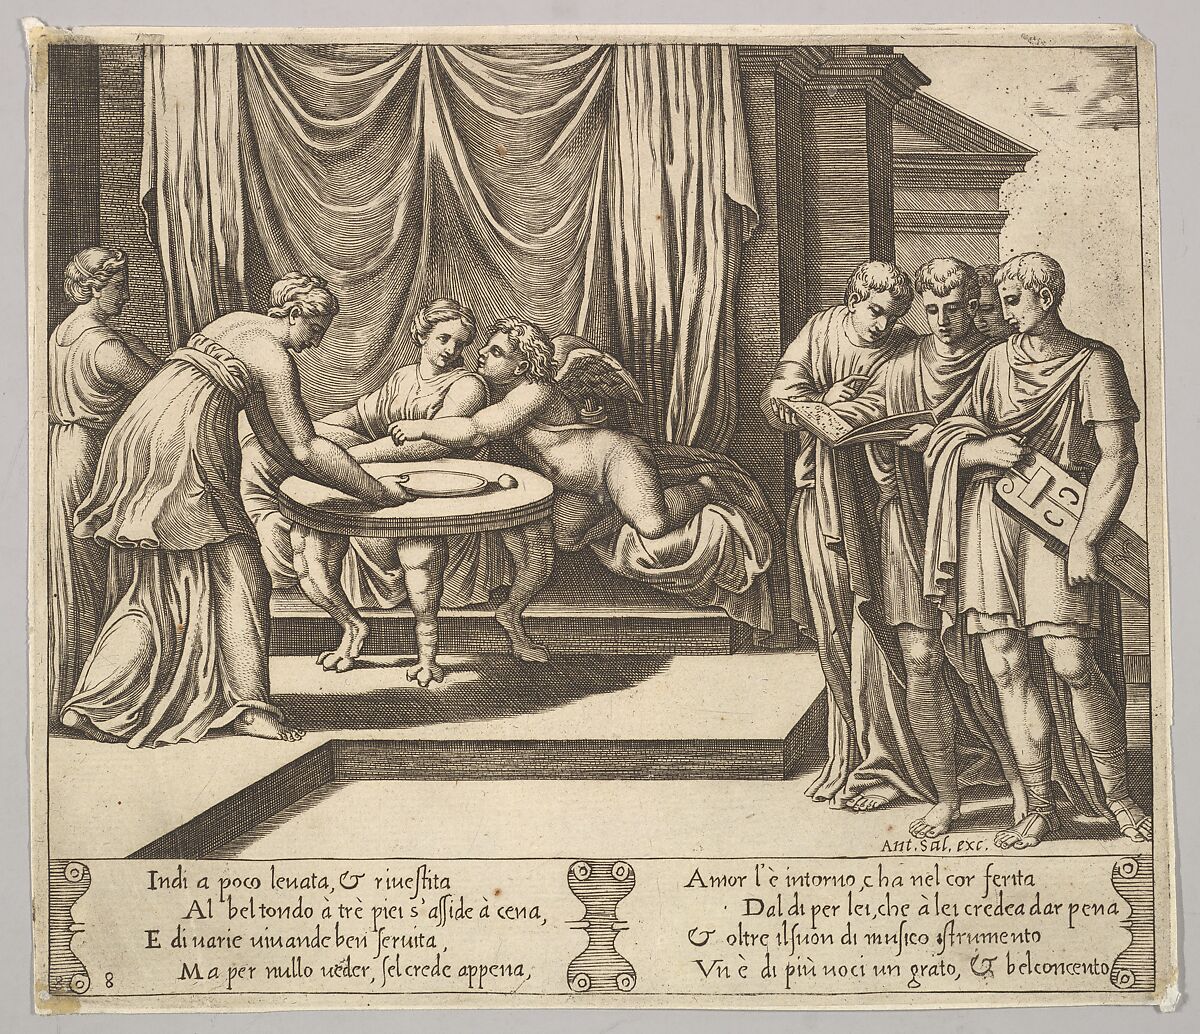 Plate 8: Psyche seated at a table and attended by invisible servants, Eros beside the goddess, from "The Fable of Cupid and Psyche", Master of the Die (Italian, active Rome, ca. 1530–60), Engraving 